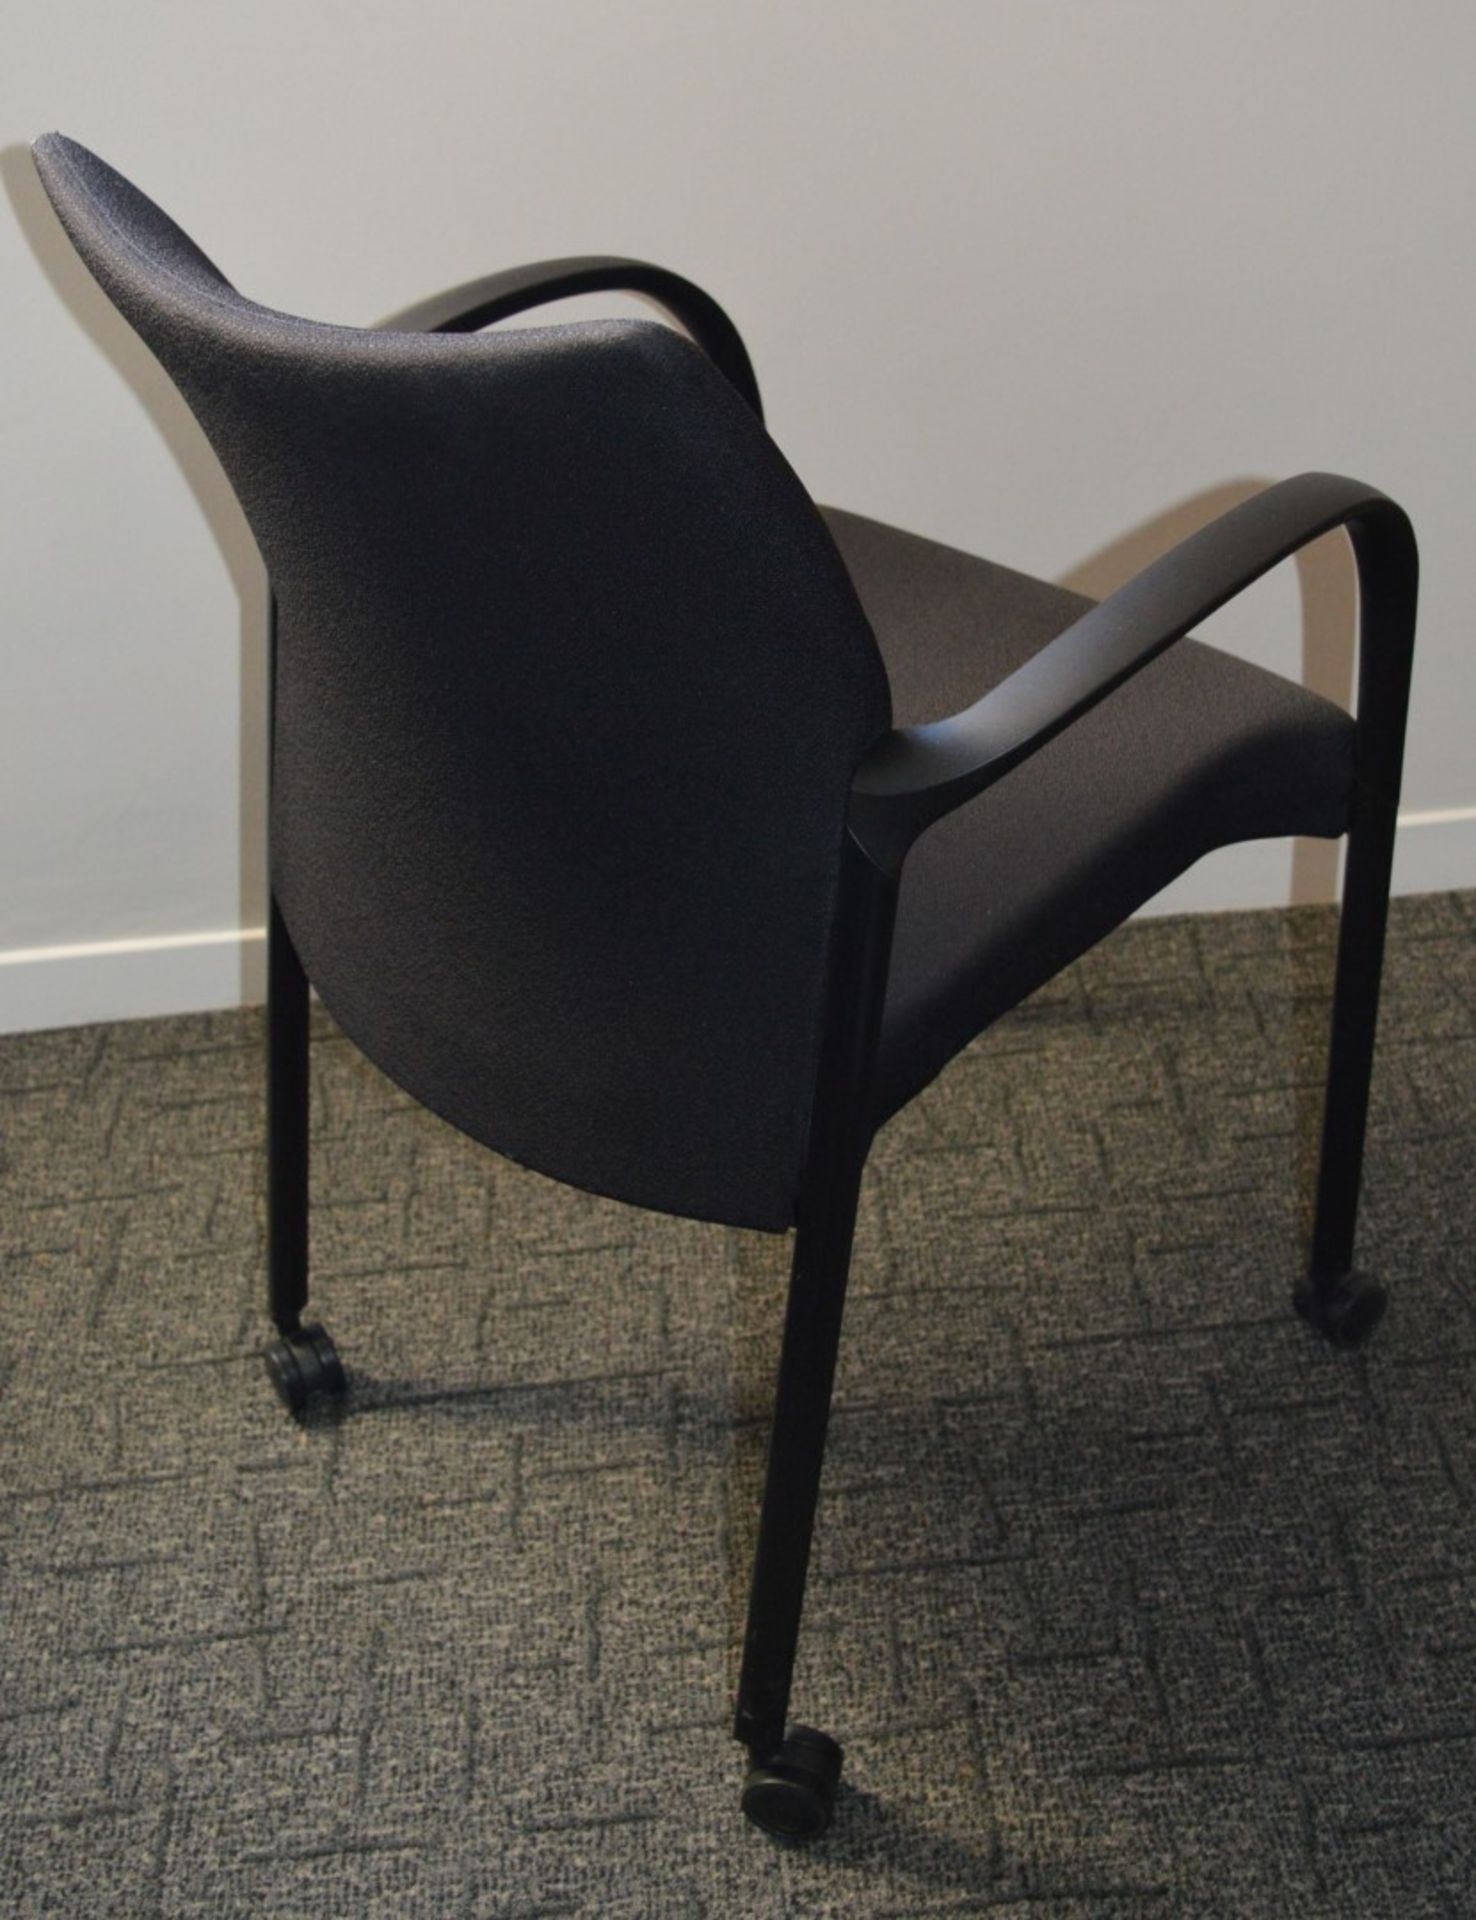 4 x Senator T117A Havana Extreme Office Chairs - Fully Upholstered With Black Frame, Arm Rests and - Image 5 of 6